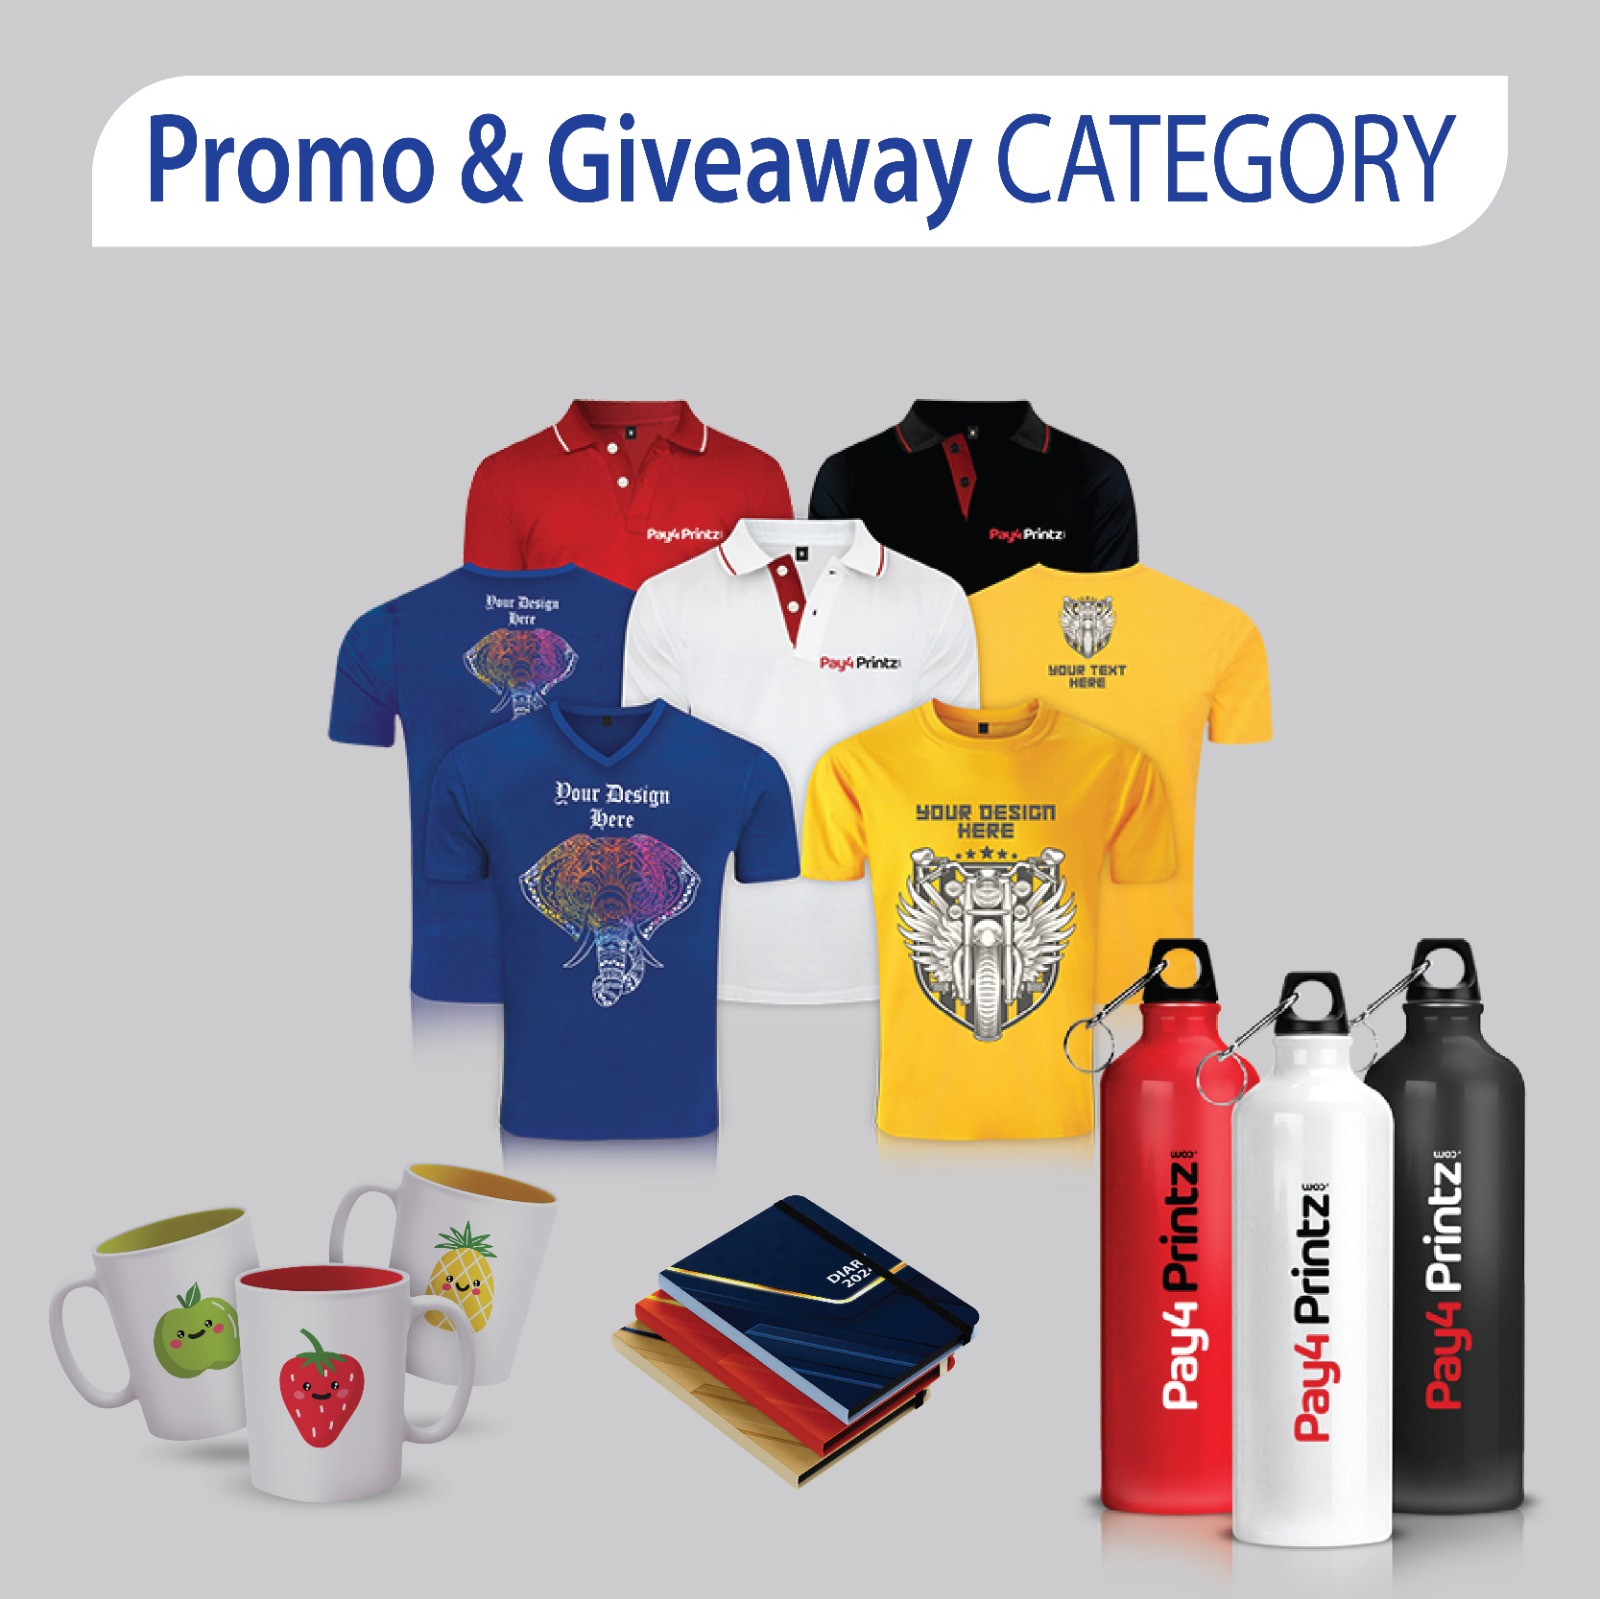 Promo & Giveaway Category